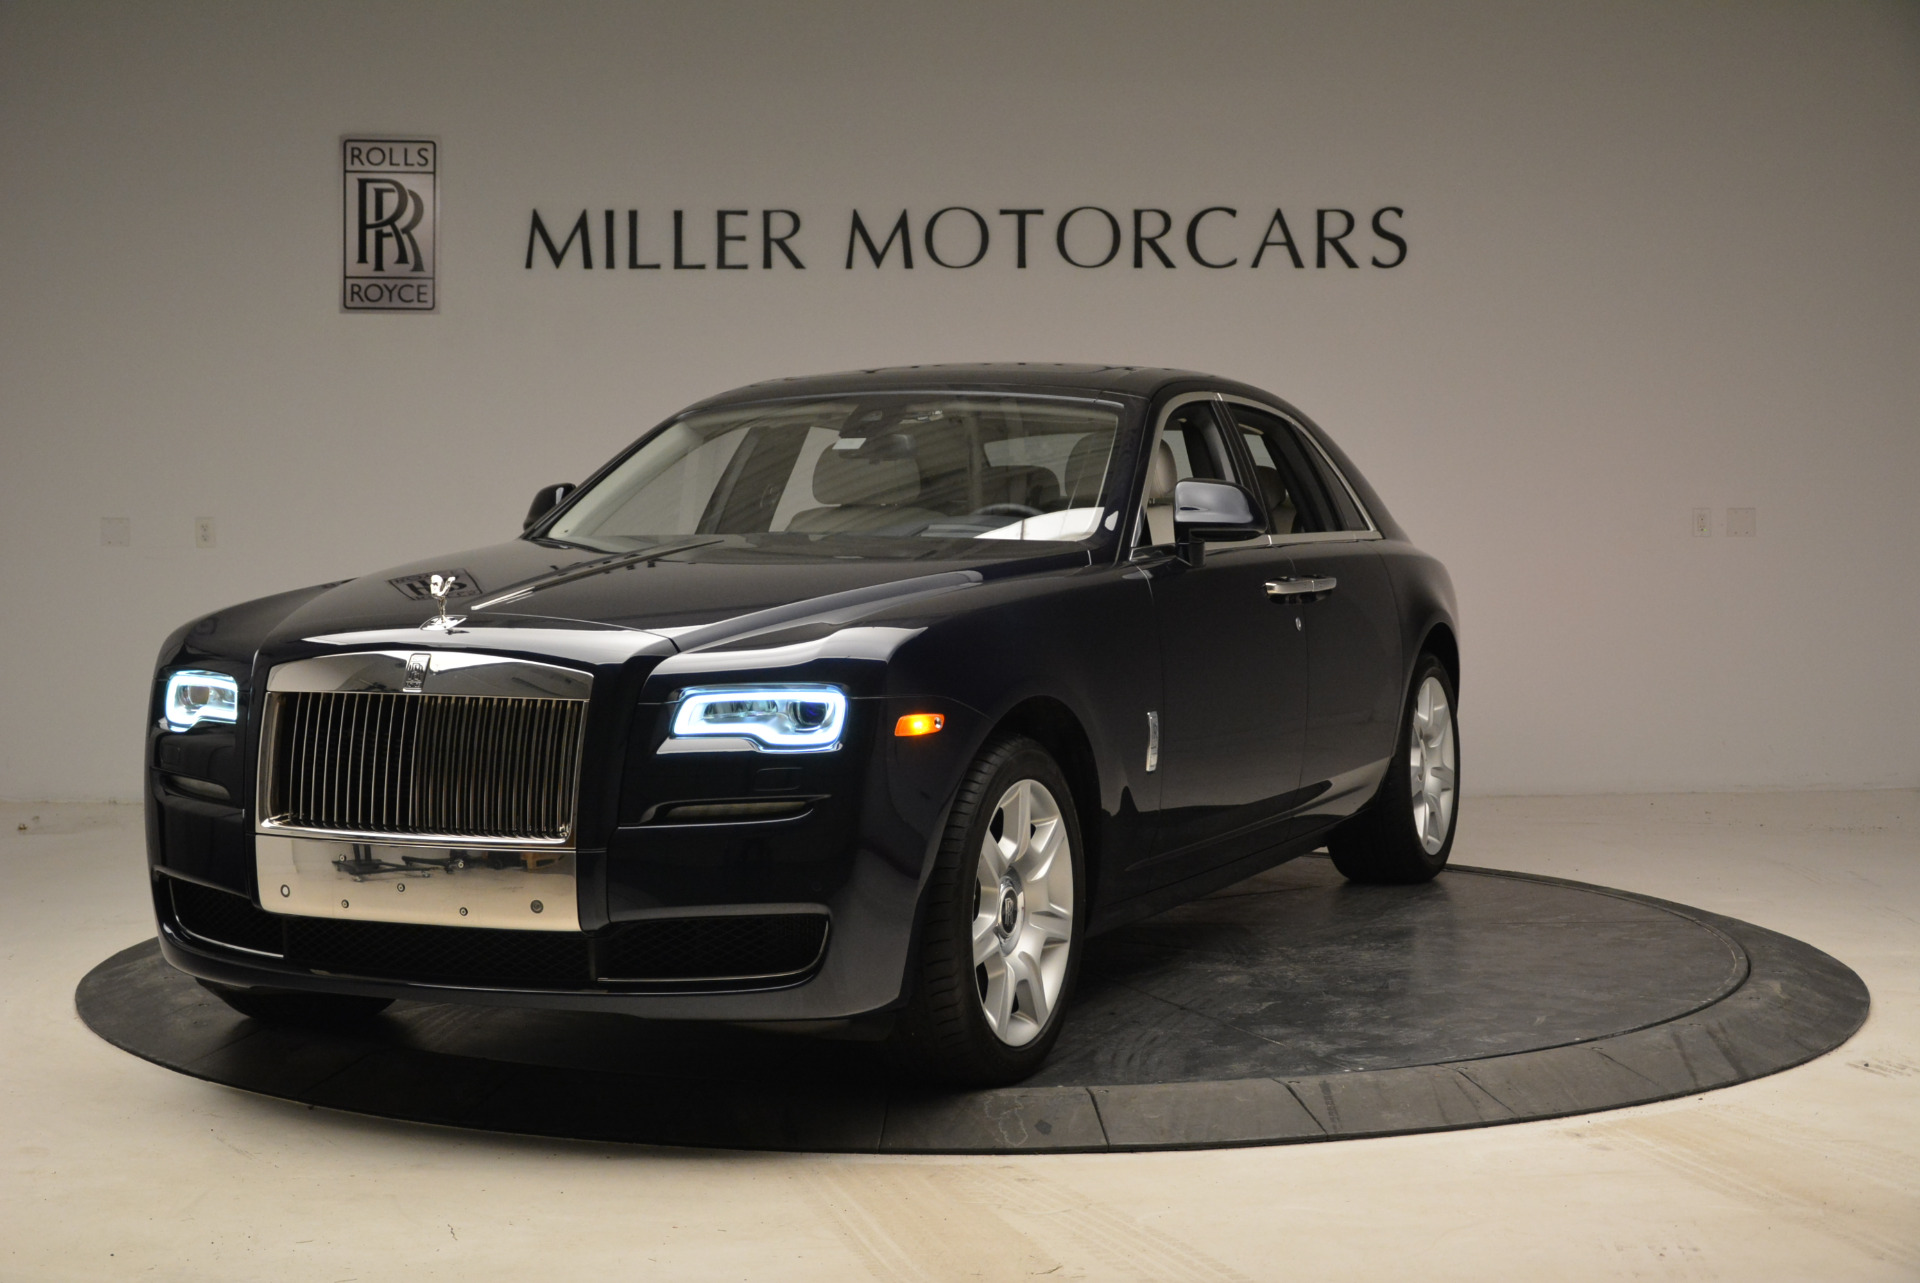 Used 2015 Rolls-Royce Ghost for sale Sold at McLaren Greenwich in Greenwich CT 06830 1